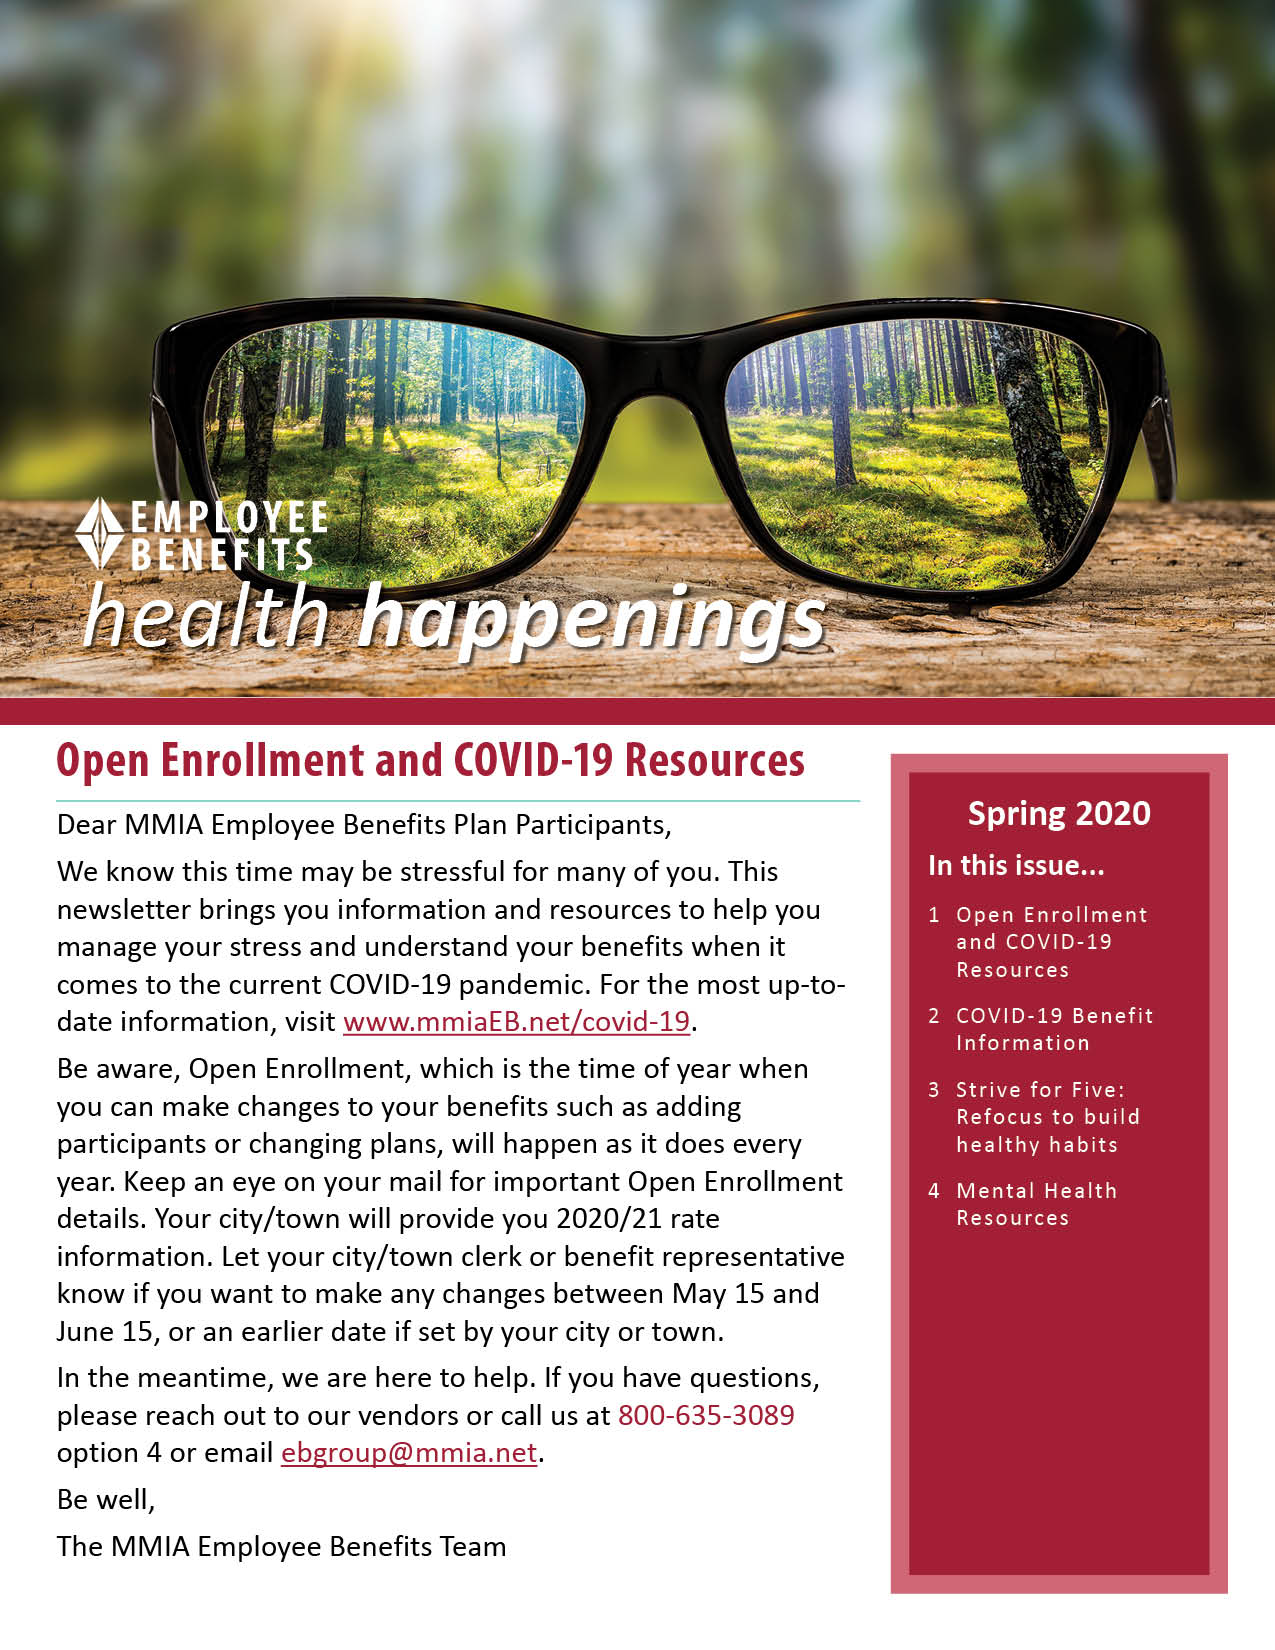 Employee Benefits Health happenings Front Cover - Spring 2020